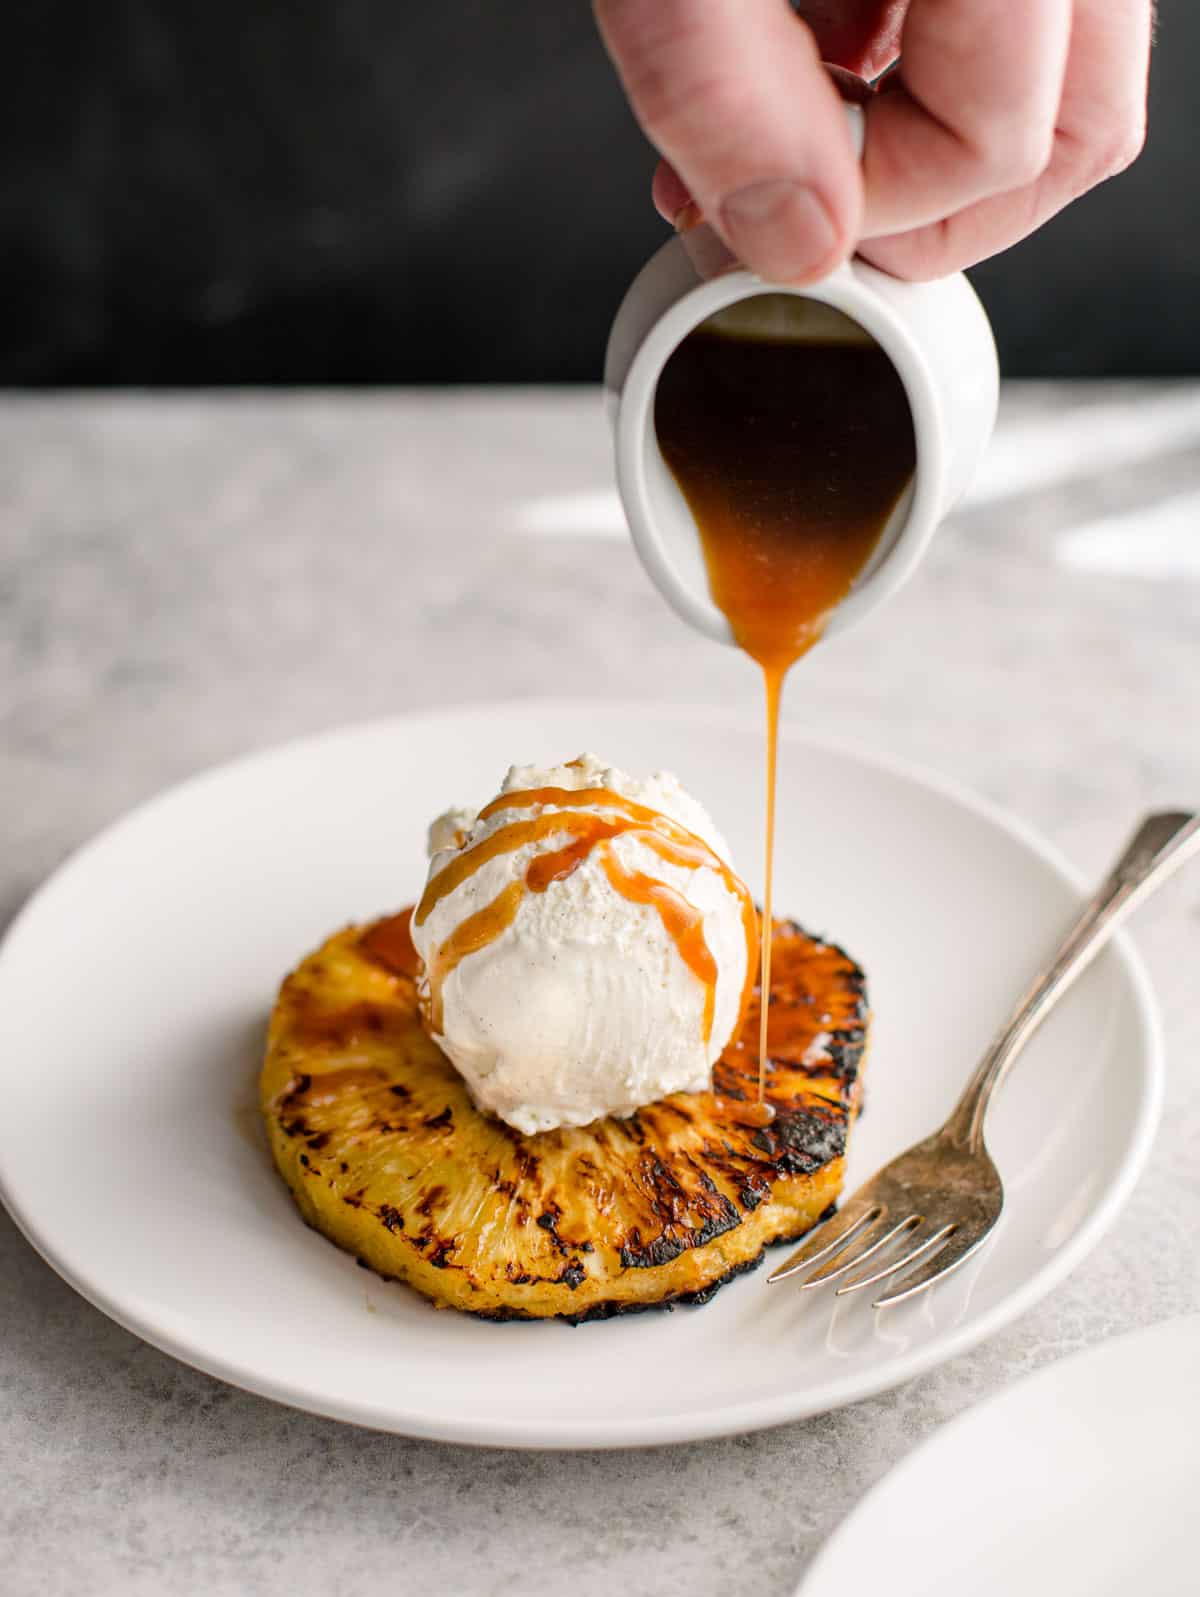 Pouring rum glaze over ice cream and grilled pineapple.